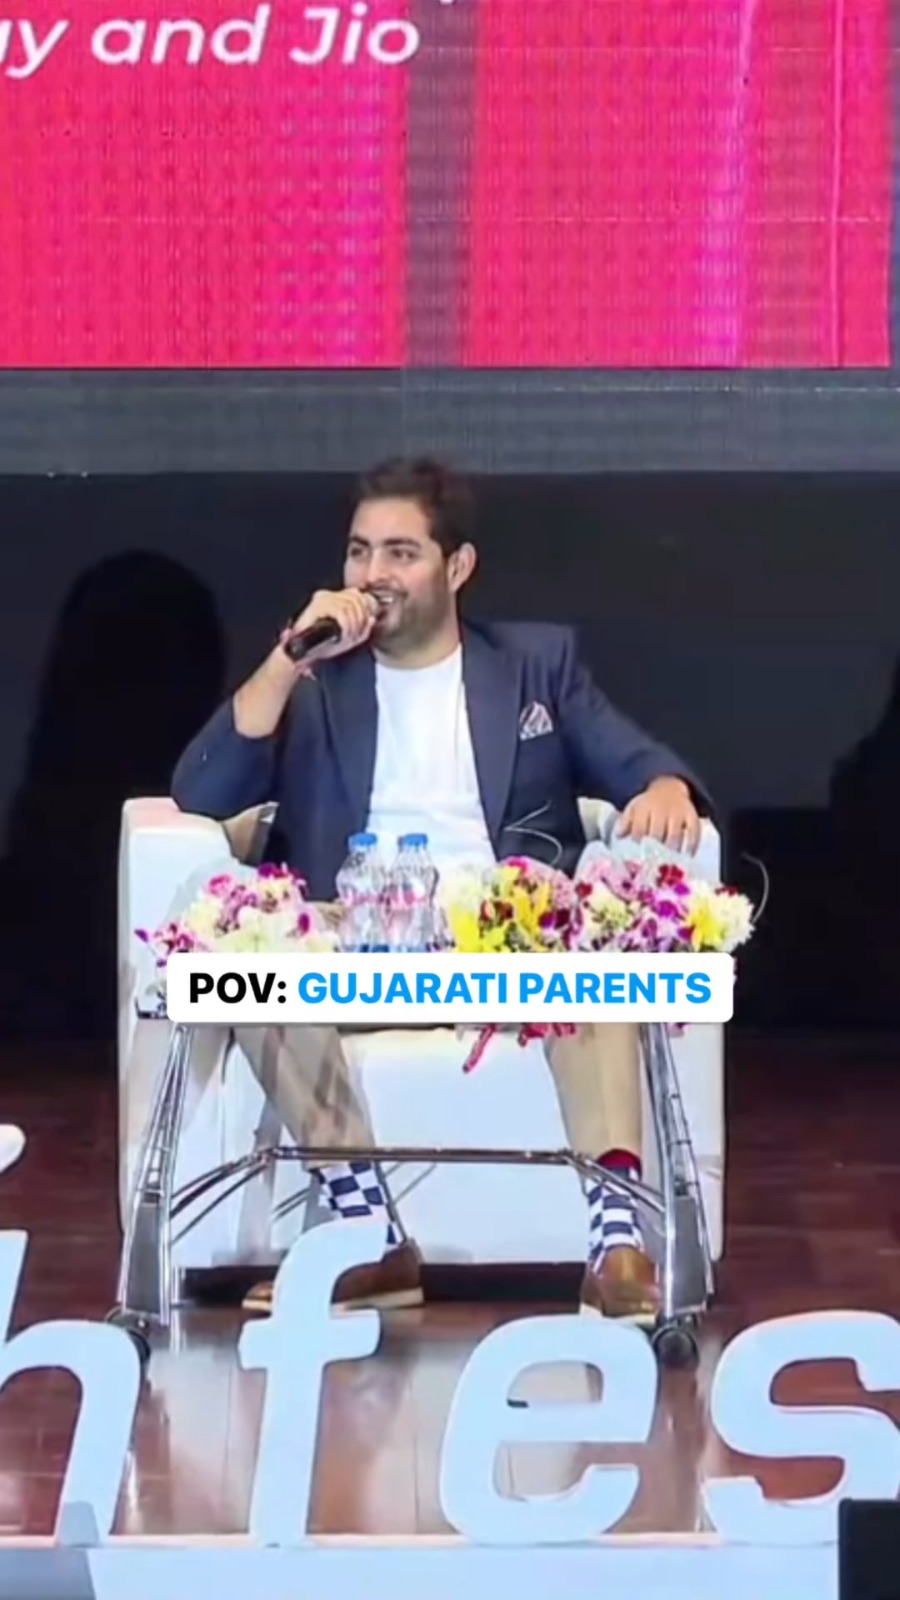 My father was not believing that I got an invitation to speak at IIT Bombay: Akash Ambani